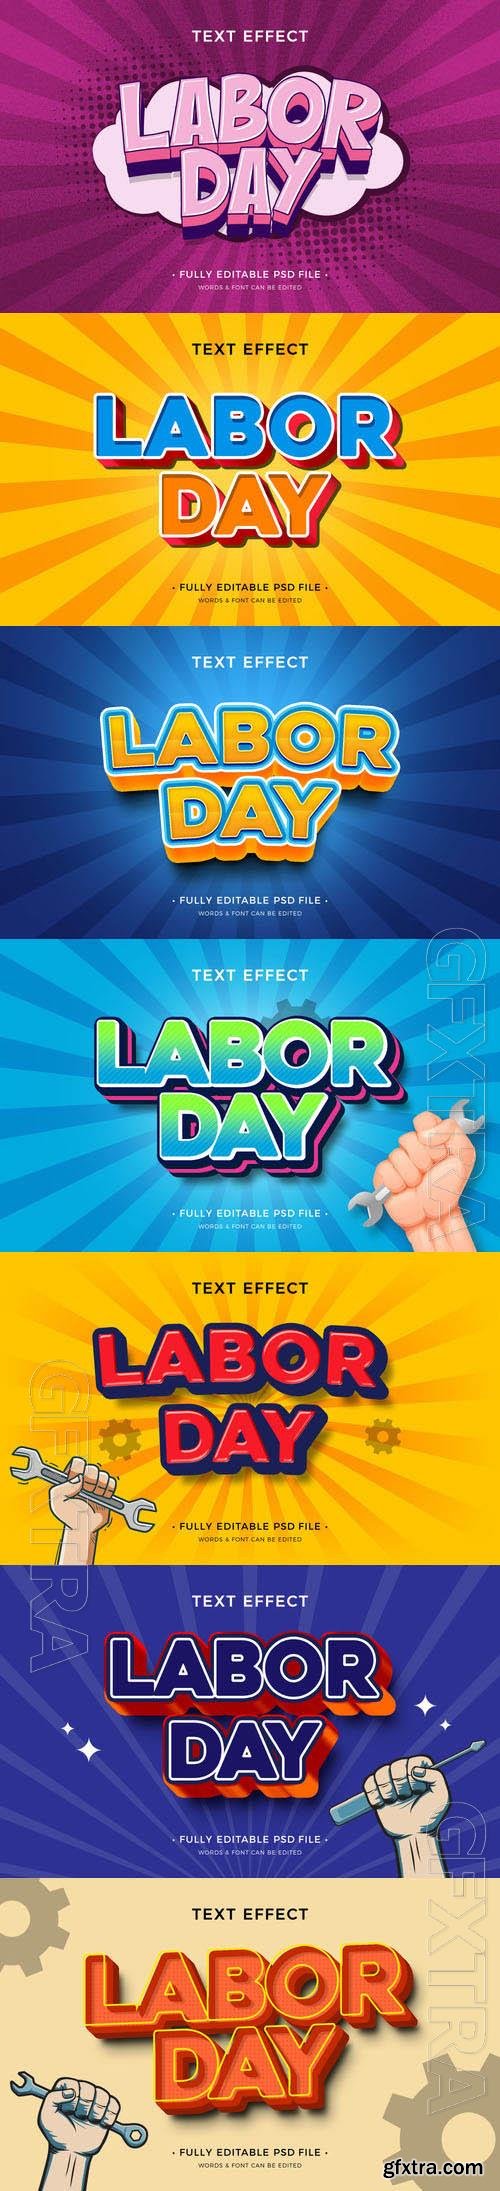 PSD labor day text effect